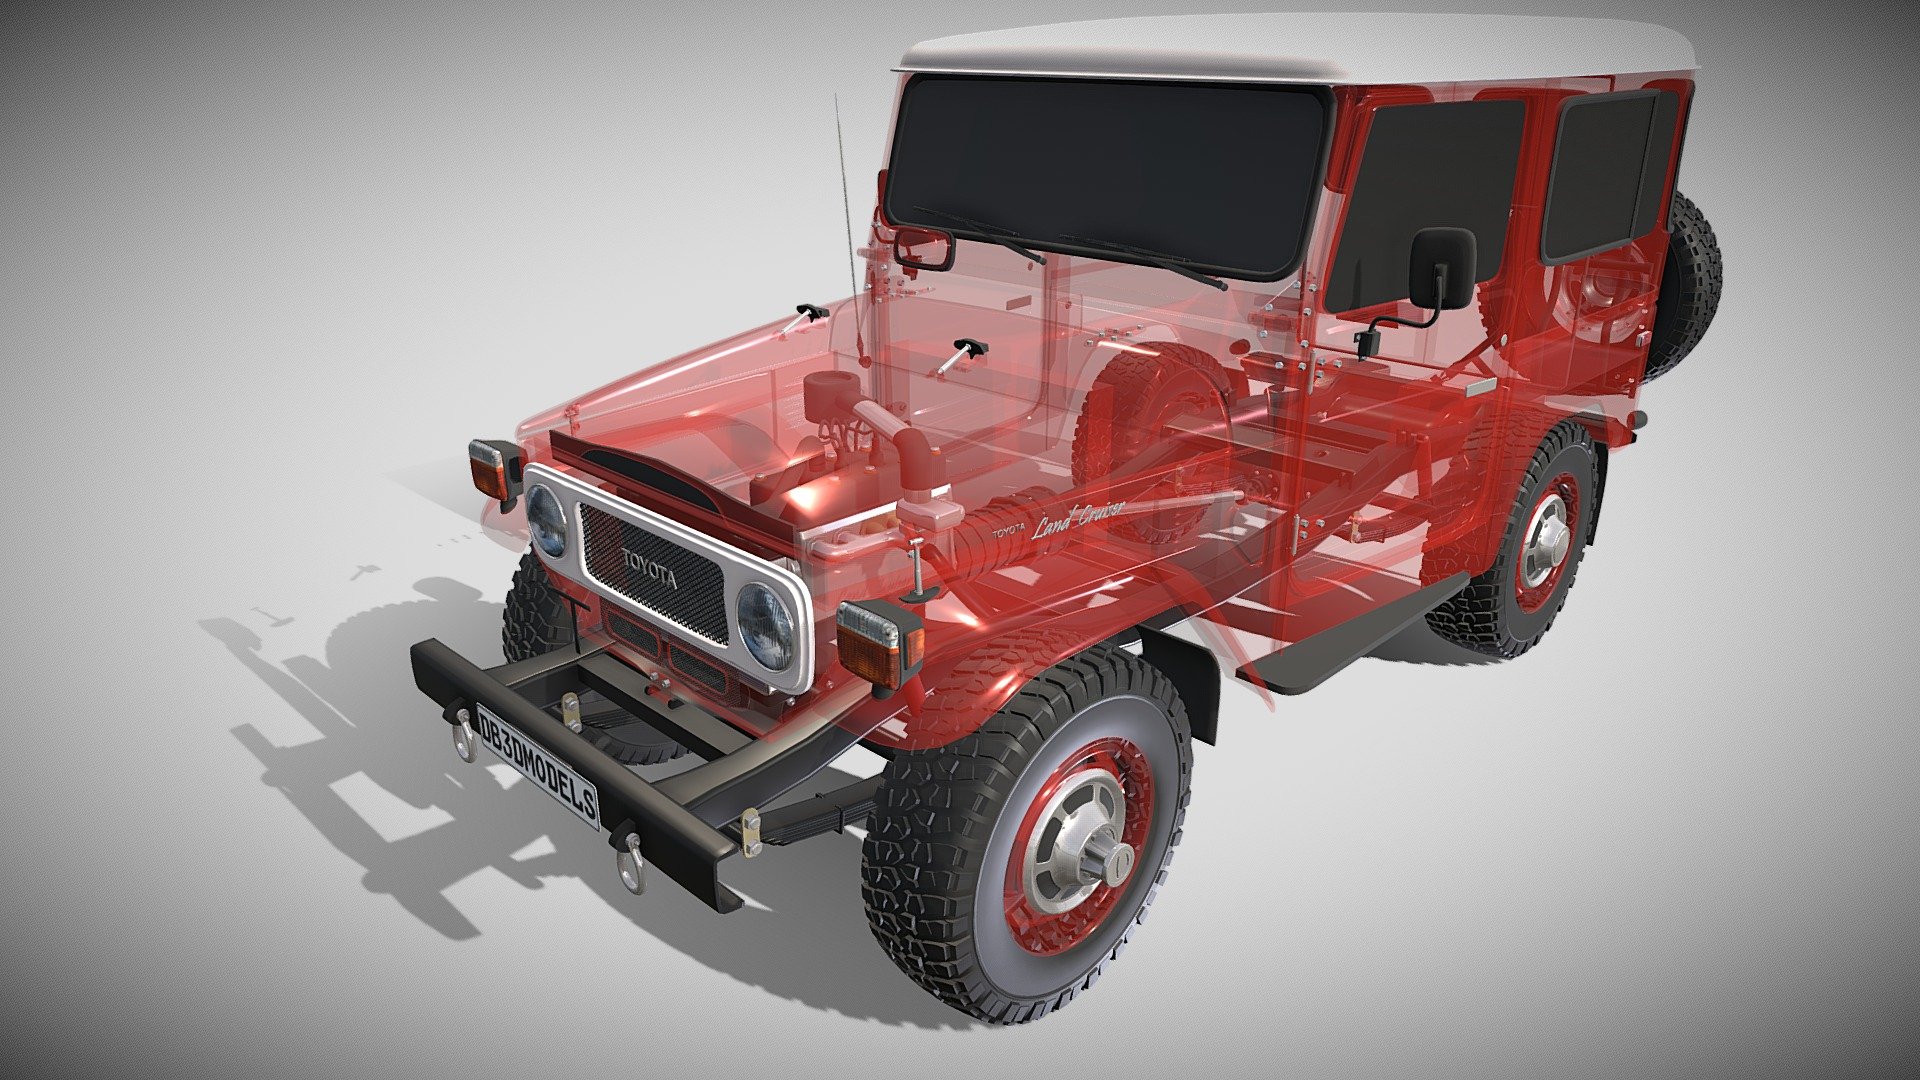 Toyota Land Cruiser Fj-40 with full chassis (motor setup, transmission, brakes, linkages, suspension, steering) 3d model rendered with Cycles in Blender, as per seen on attached images.

File formats:
-.blend, rendered with cycles, as seen in the images;
-.blend, rendered with cycles, with a see-through of the chassis, as seen in the images;
-.obj, with materials applied;
-.dae, with materials applied;
-.fbx, with material slots applied;
-.stl;

Files come named appropriately and split by file format.

3D Software:
The 3D model was originally created in to Blender 2.79 and rendered with Cycles.

Materials and textures:
The models have materials applied in all formats, and are ready to import and render.
The models come with no image textures as everything is material based 3d model